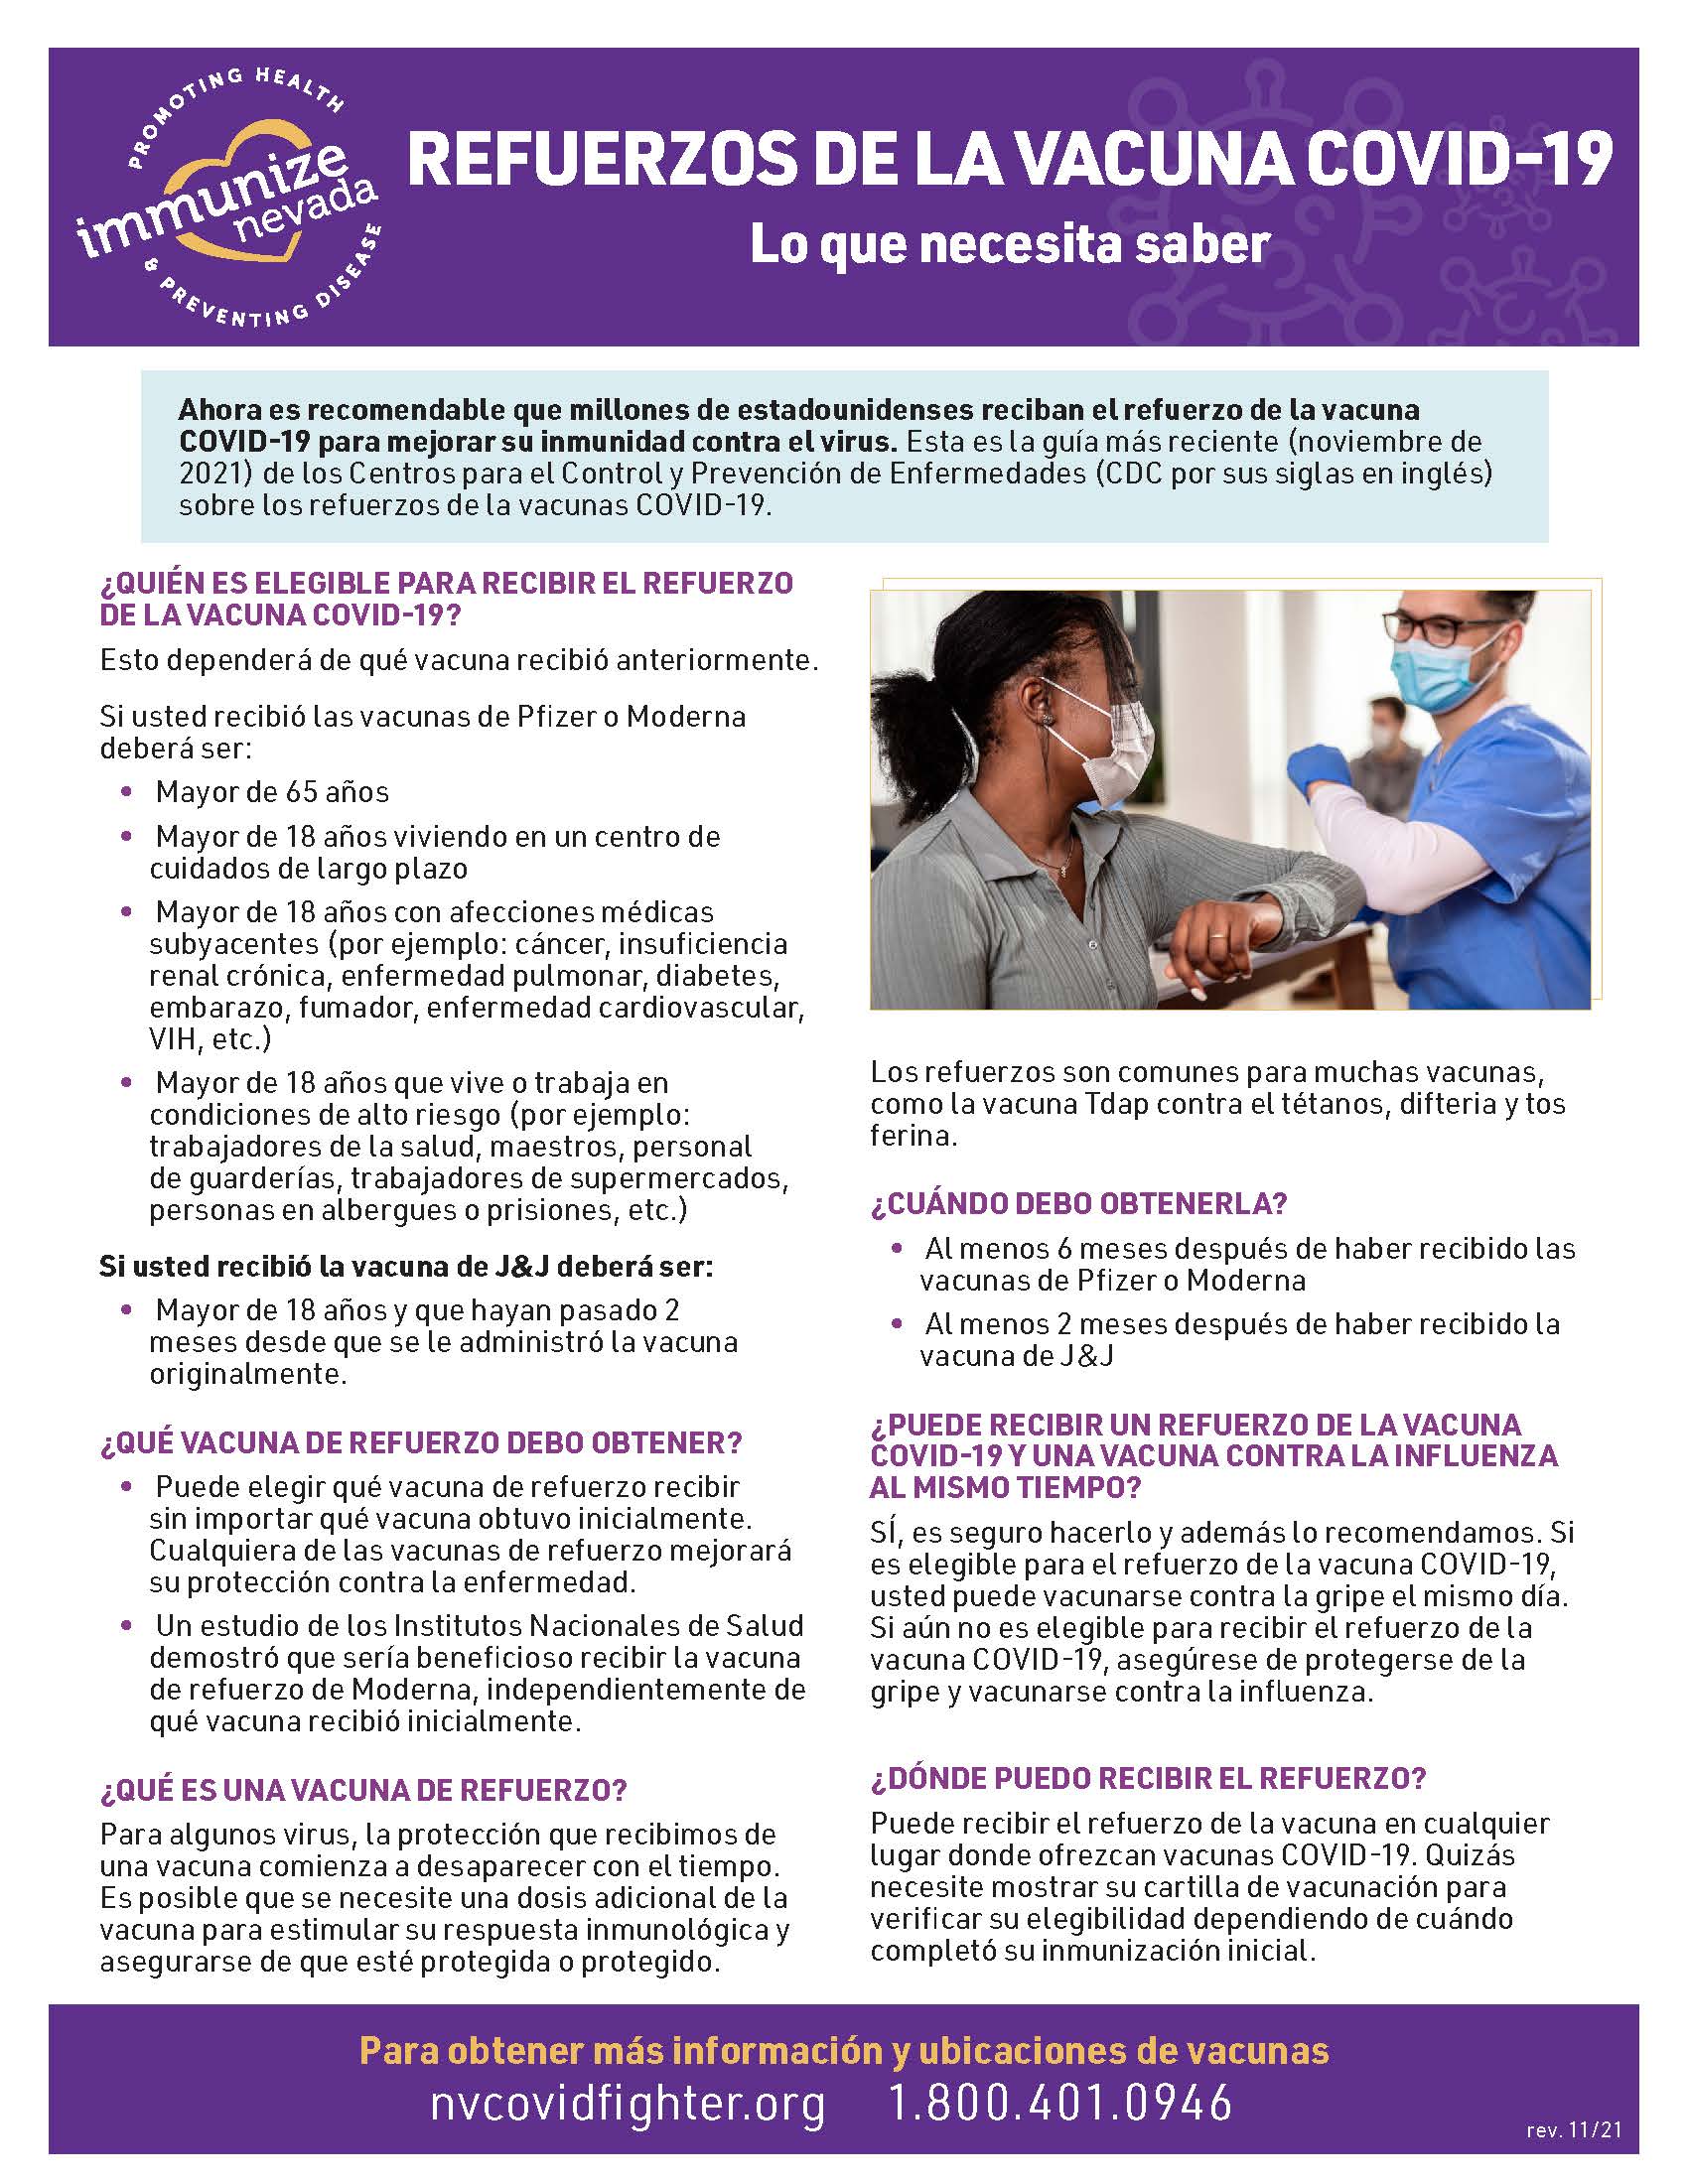 Designed one pager in Spanish about the COVID-19 Vaccine Booster shots